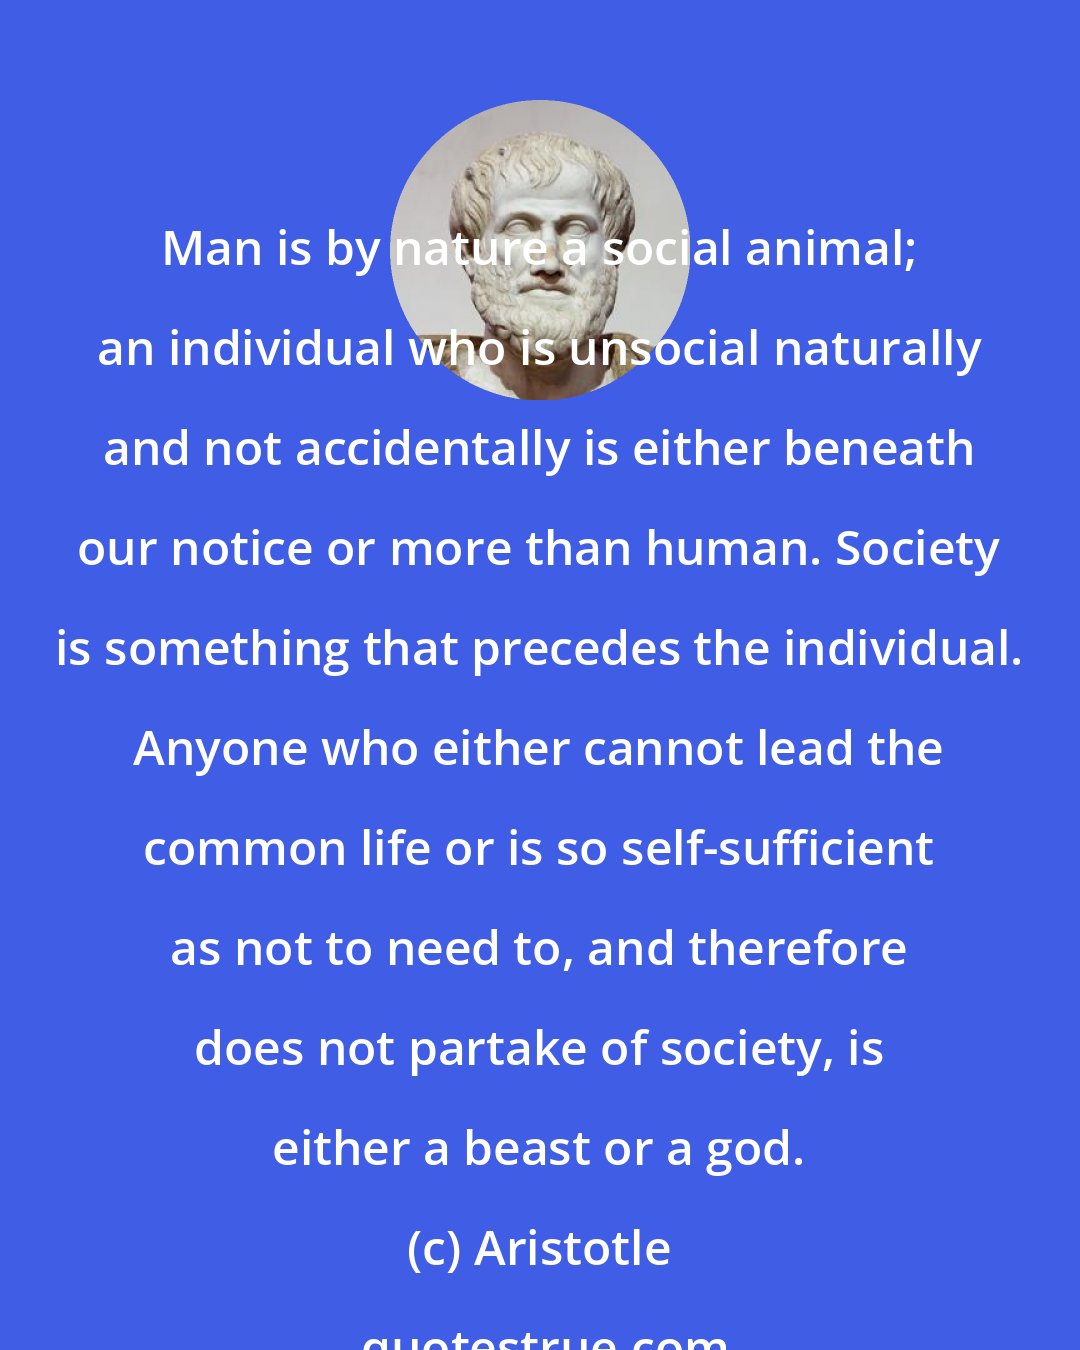 Aristotle: Man is by nature a social animal; an individual who is unsocial naturally and not accidentally is either beneath our notice or more than human. Society is something that precedes the individual. Anyone who either cannot lead the common life or is so self-sufficient as not to need to, and therefore does not partake of society, is either a beast or a god.